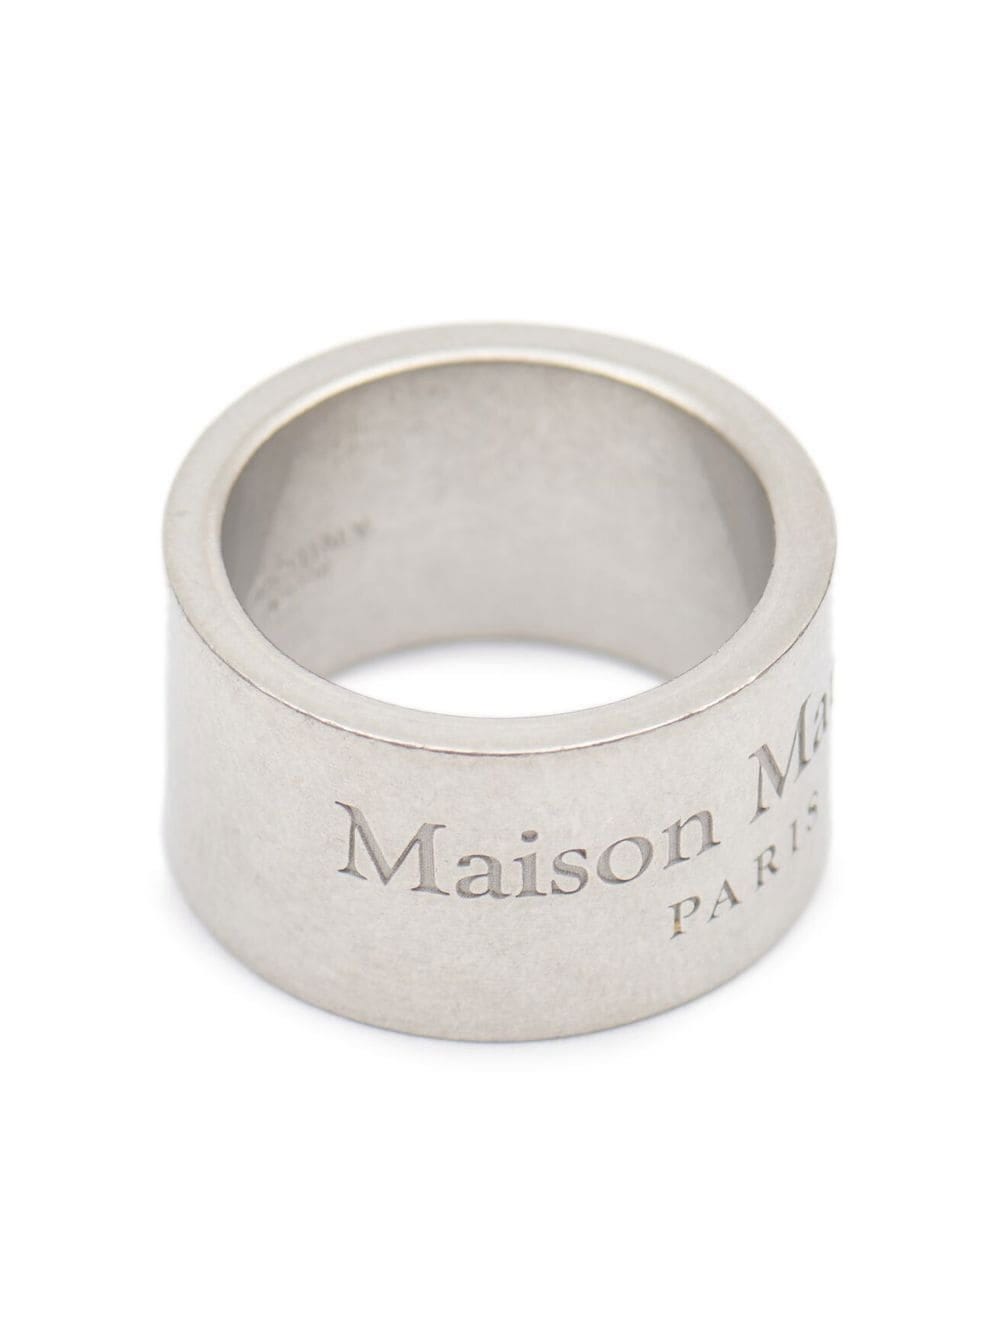 MAISON MARGIELA SILVER RING WITH ENGRAVED LOGO